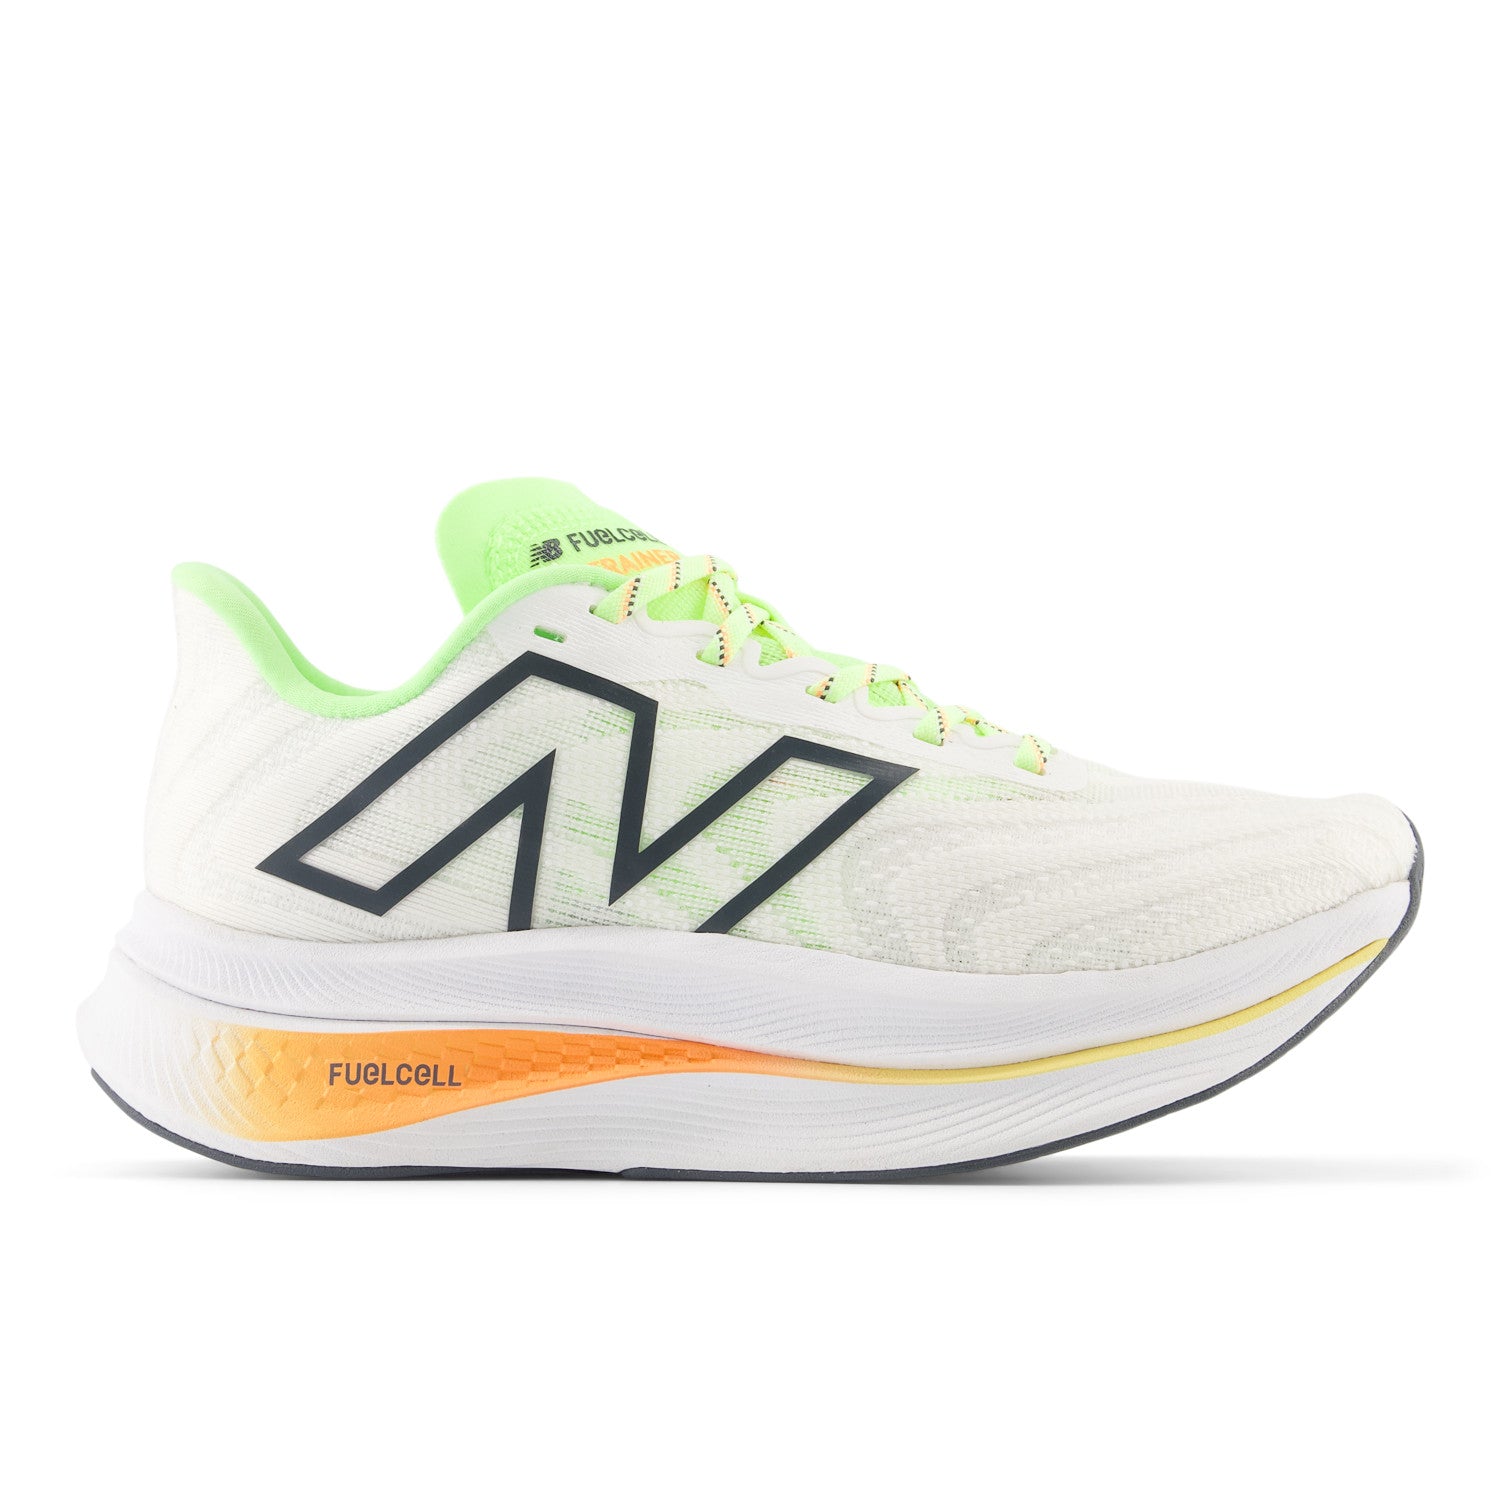 NEW BALANCE WOMEN'S FUELCELL SUPERCOMP TRAINER V2 - B - CA3 WHITE/BLEACHED LIME 5.0